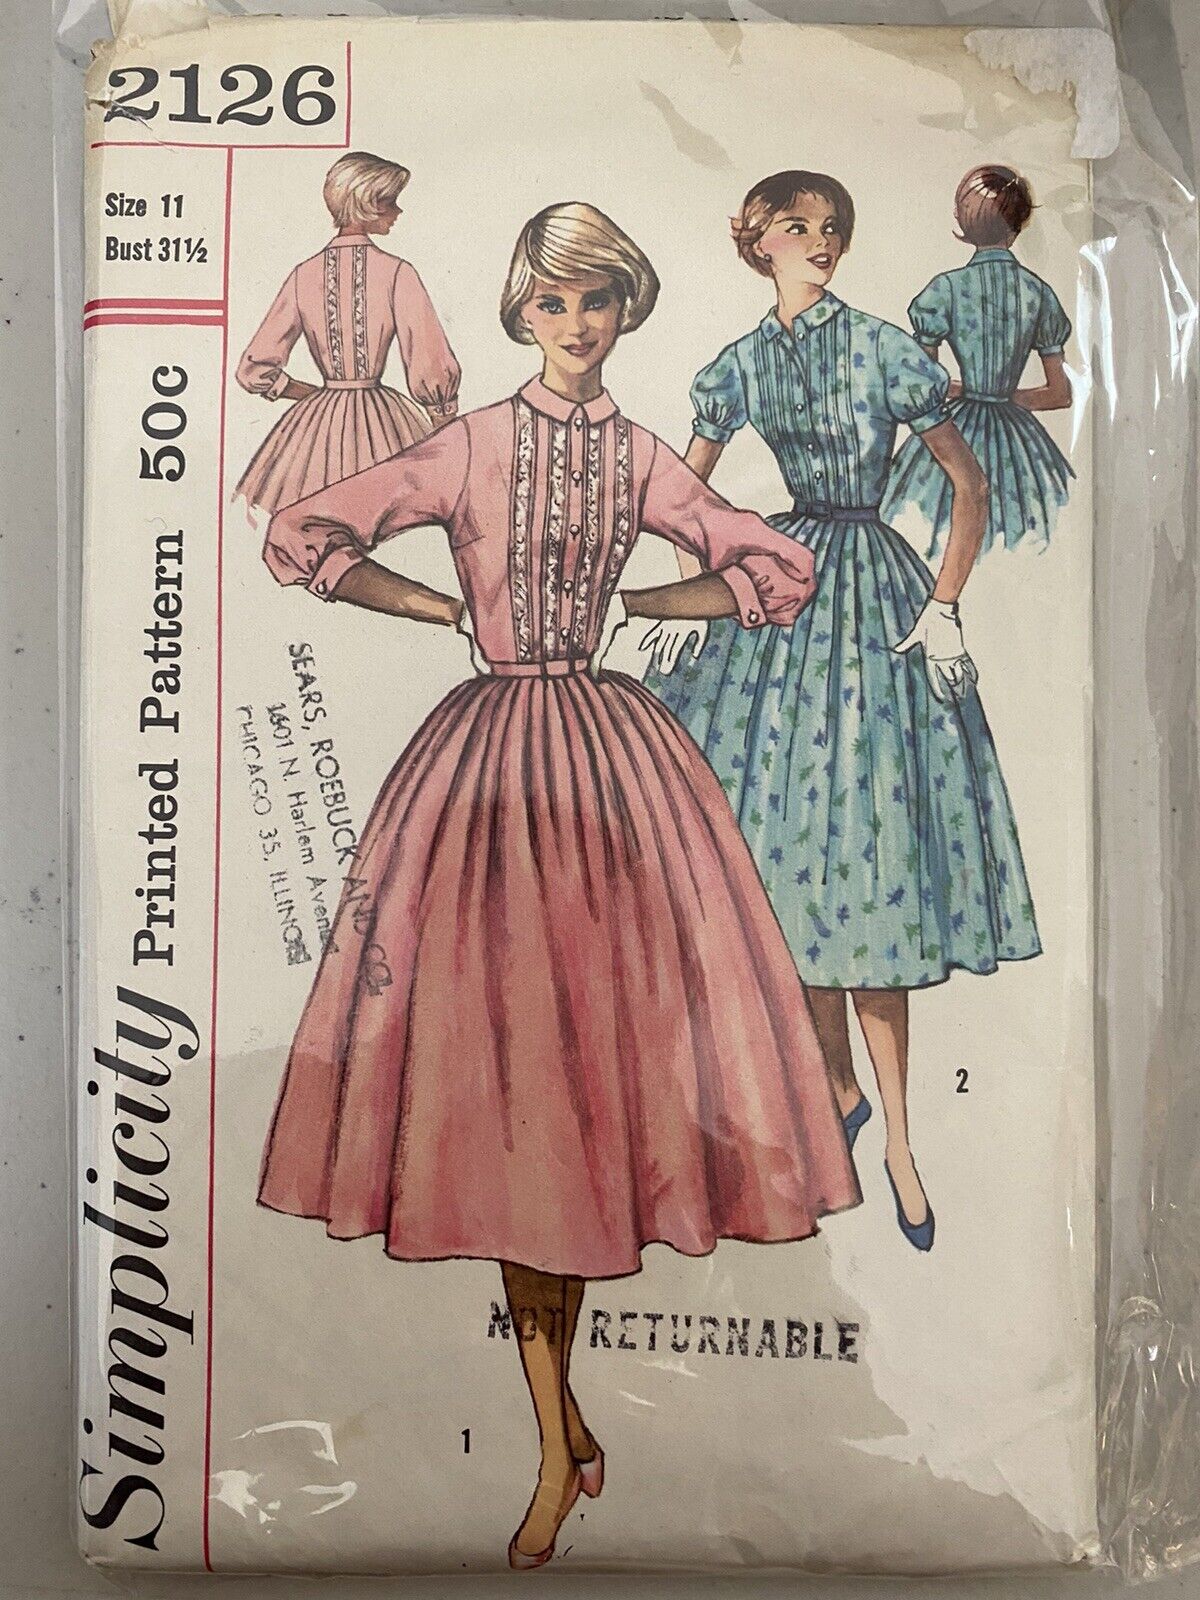 1957 Simplicity 2126 Tucked Front Top Stitched Bodice 1 Piece Party Dress 11 B31